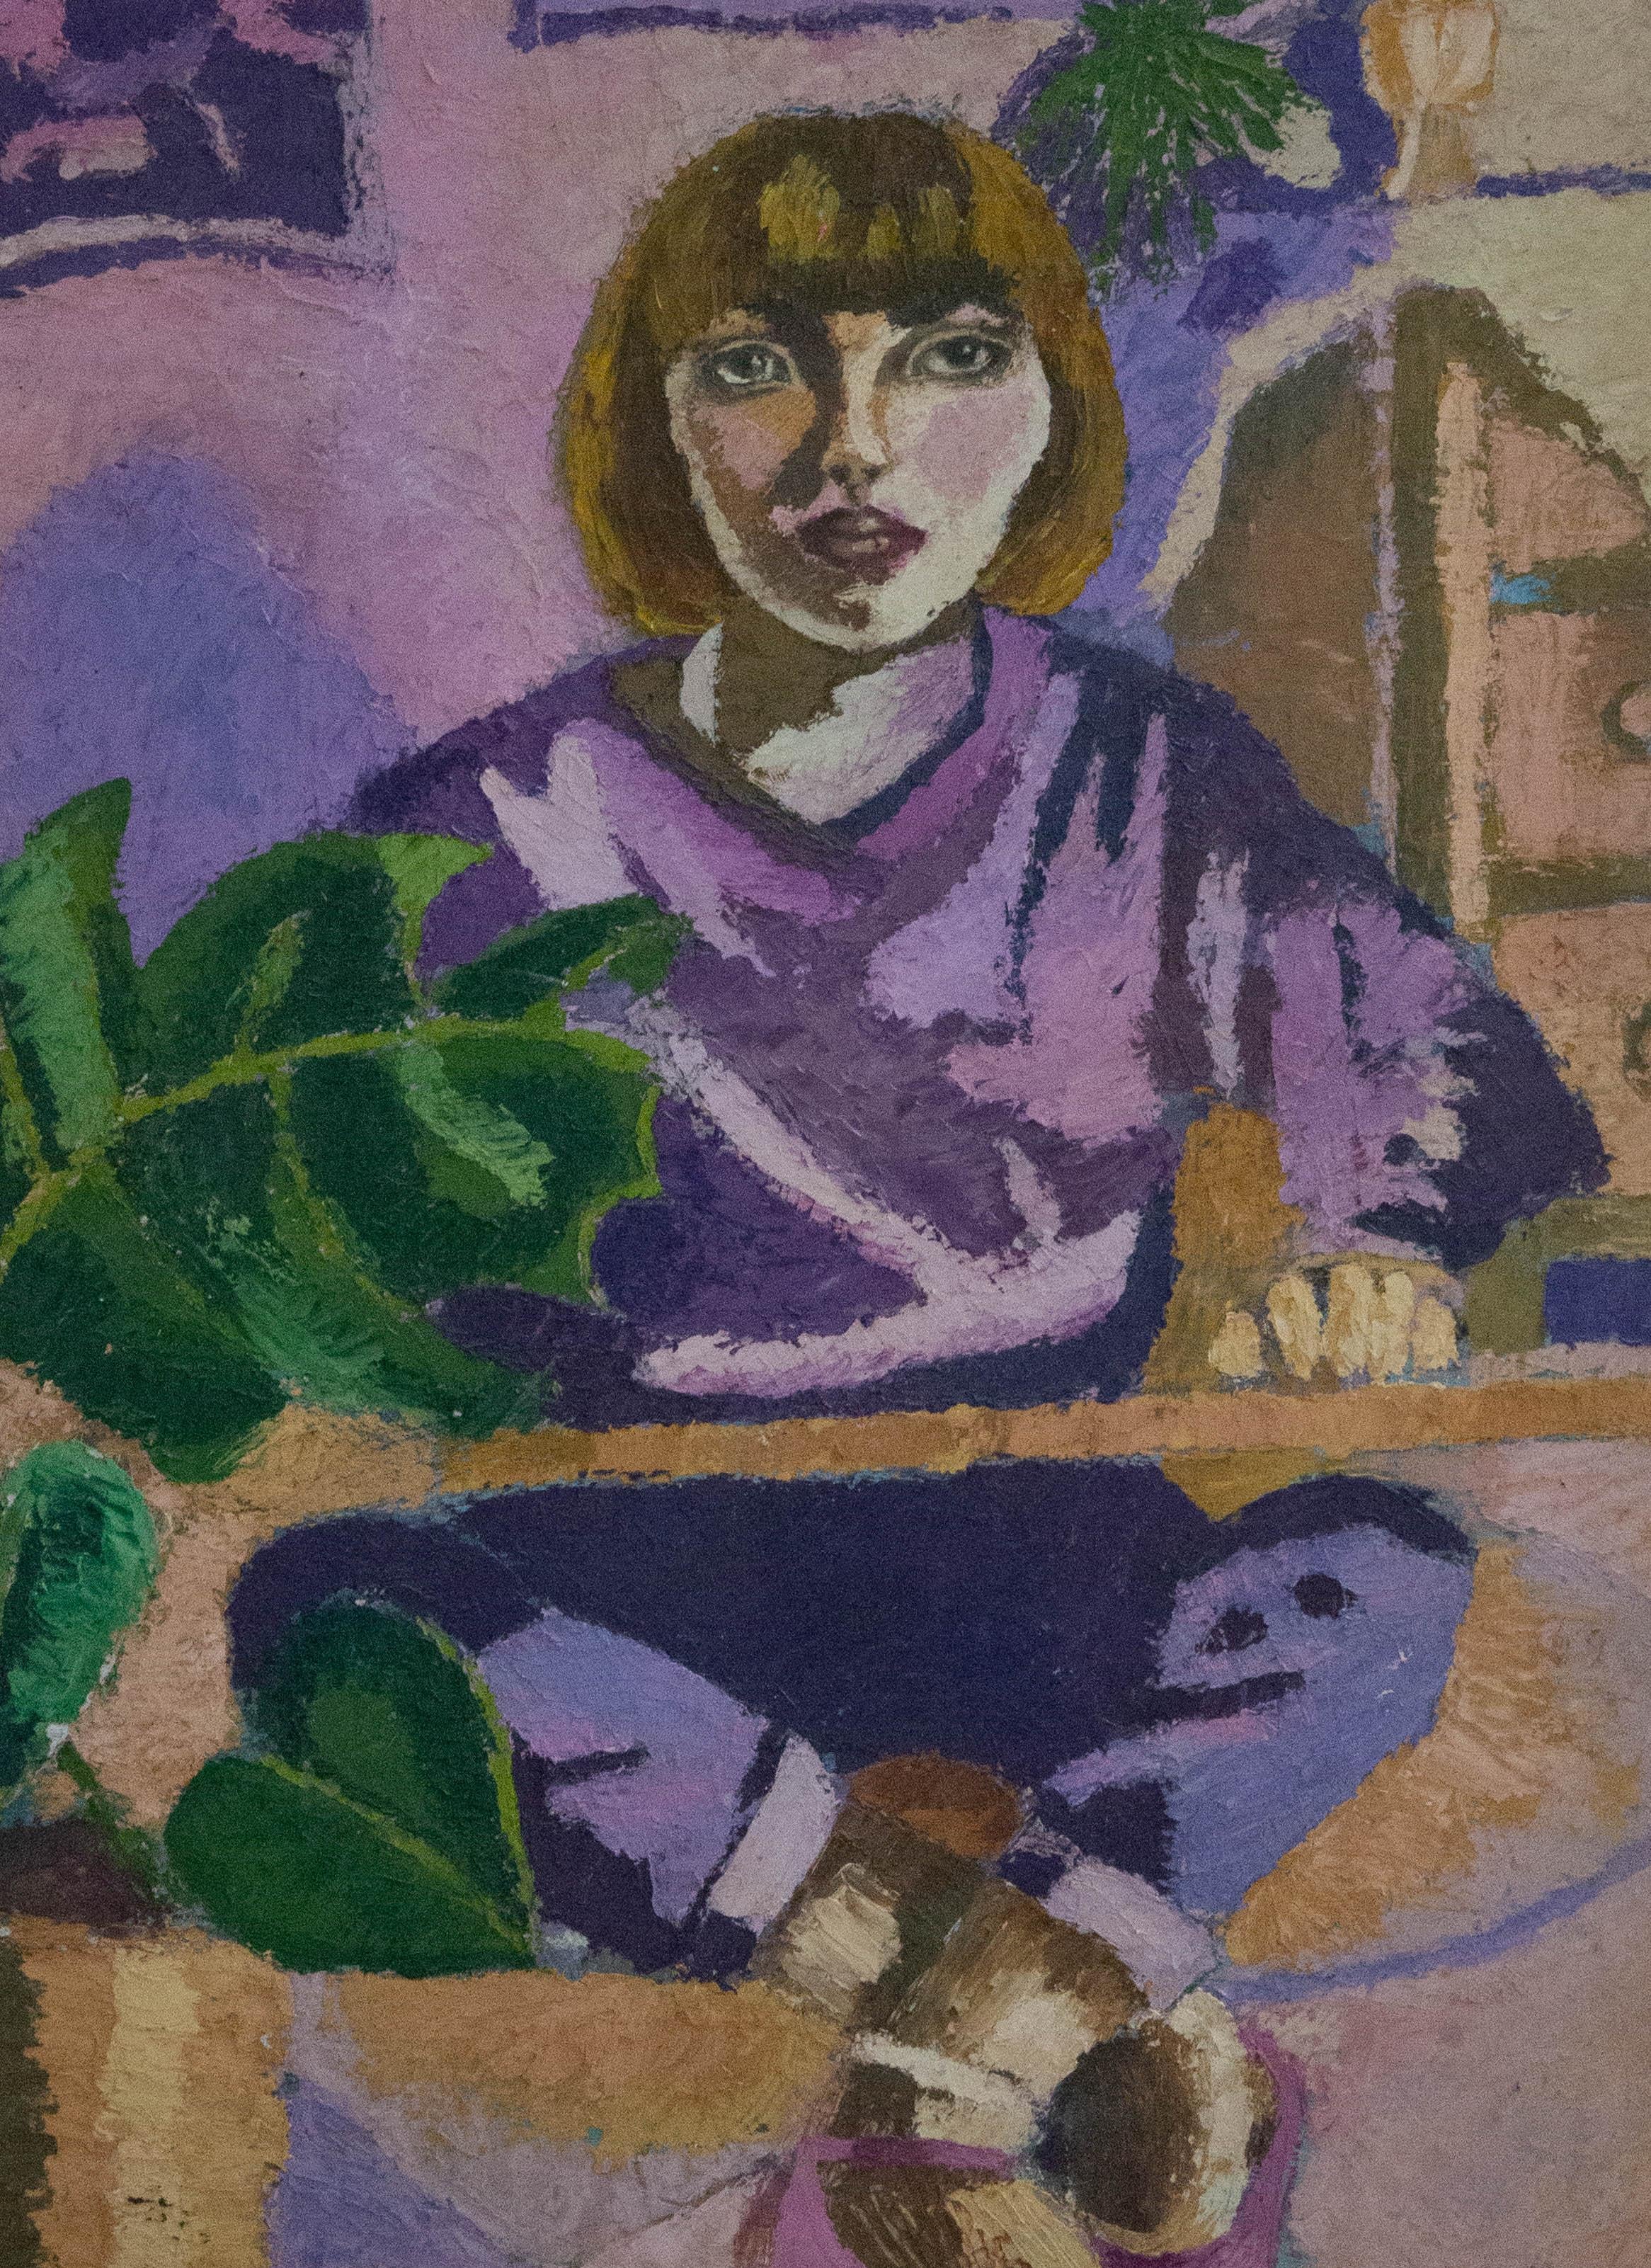 A quirky and kitsch portrait of a young woman, dressed in purple, sitting in her purple home surrounded by green plants. This captivating painting is heavily impasto, creating a dynamism in an otherwise static scene. On board.
